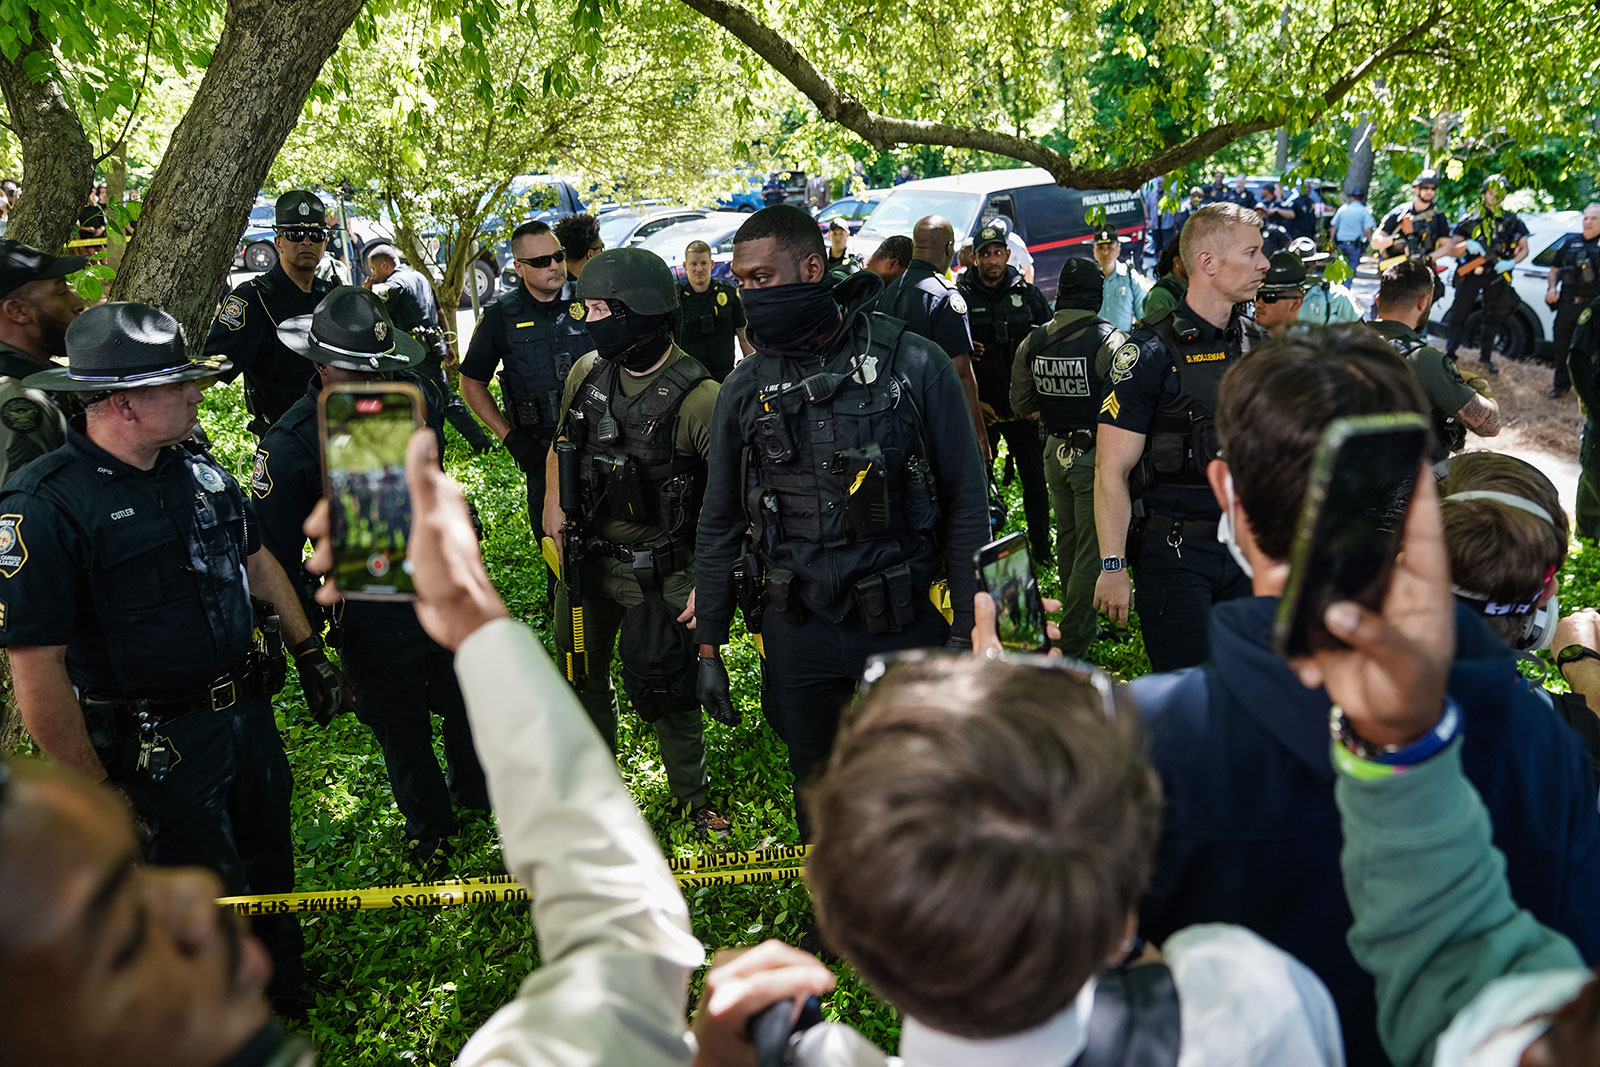 Protesters record police officers during a protest at Emory University on Thursday in Atlanta.